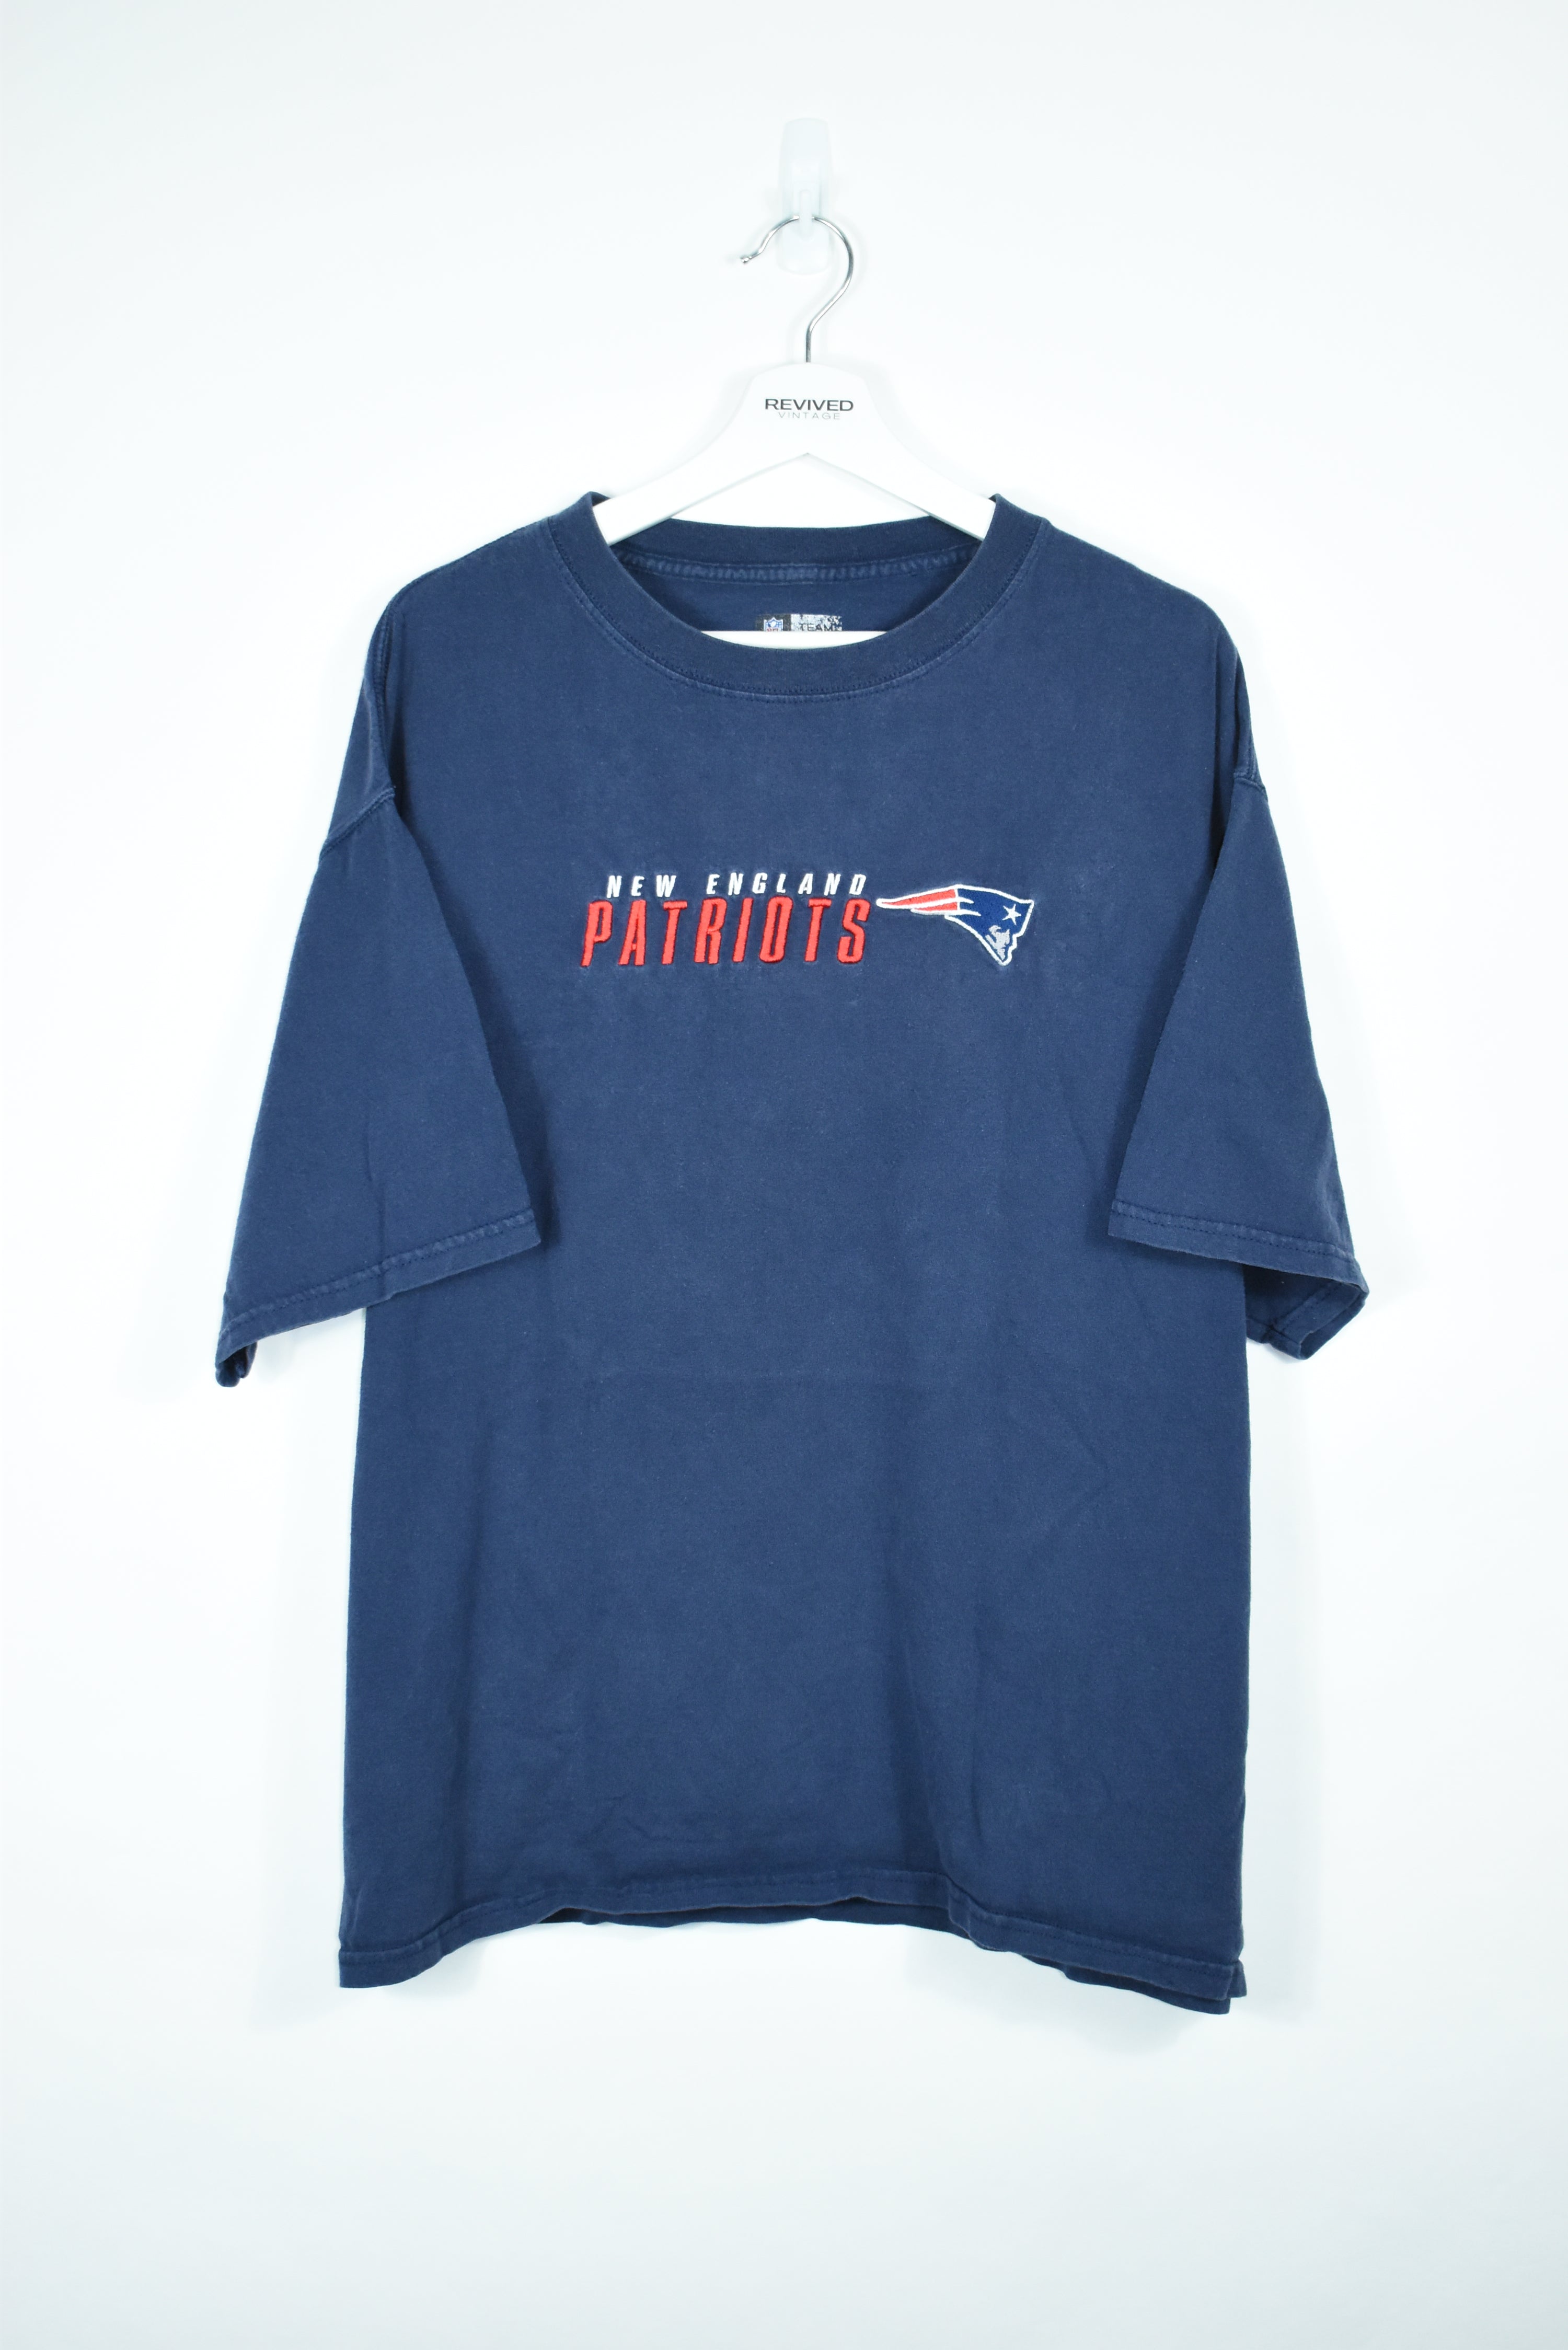 Vintage New England Patriots Embroidery T Shirt Xlarge